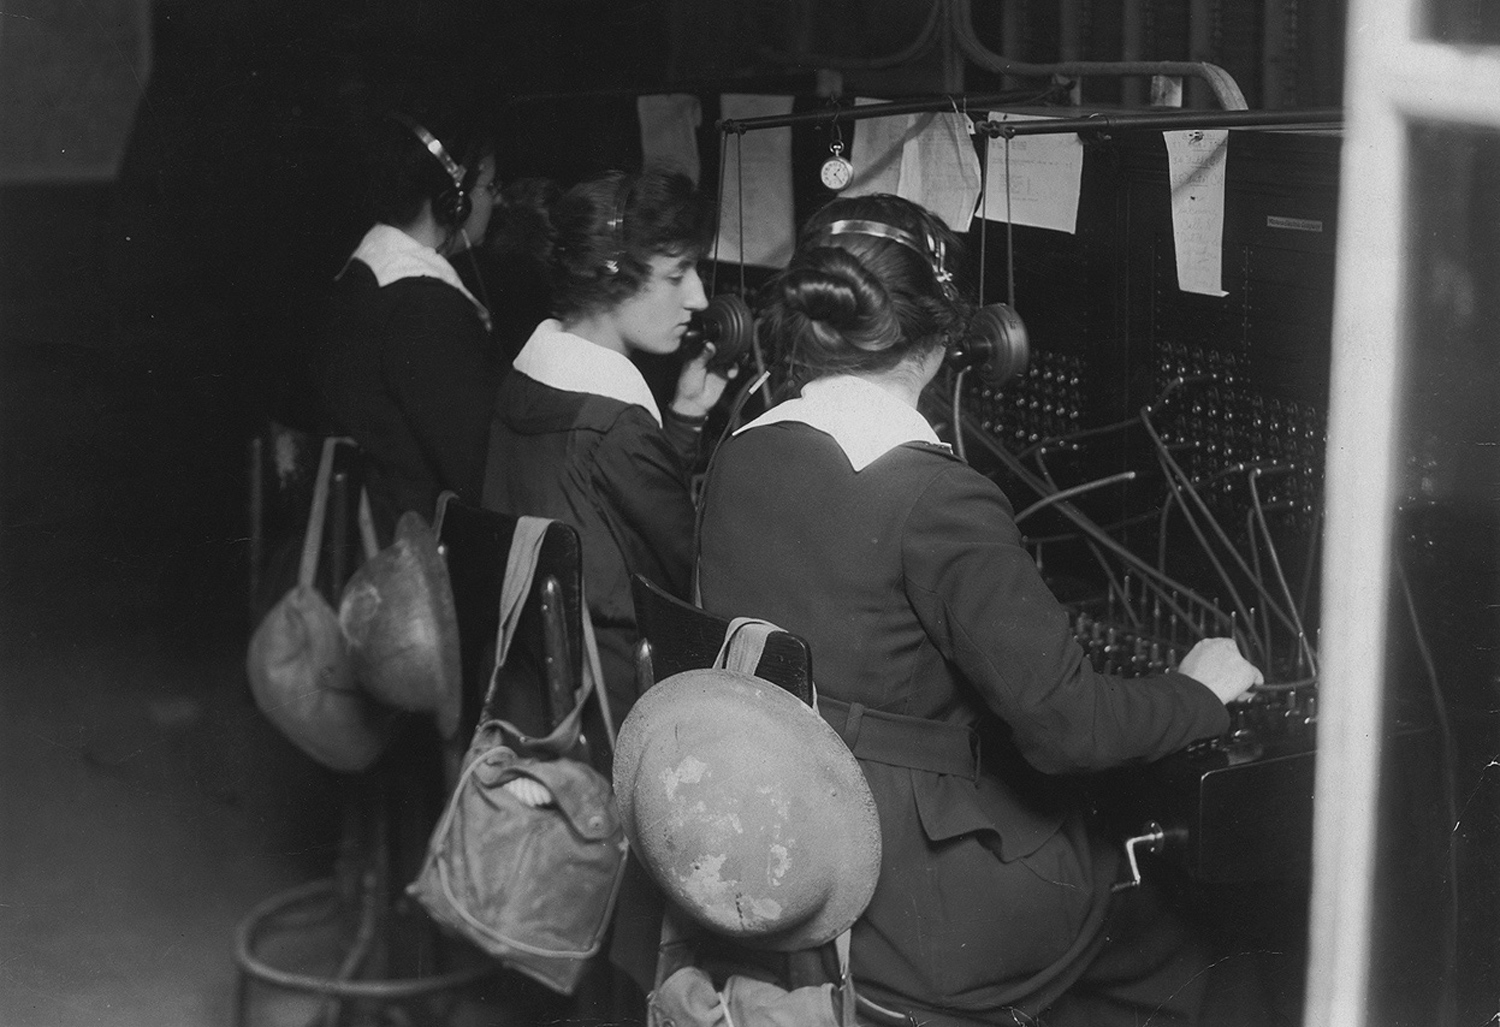 Women operated the telephone switchboards that allowed commanders to understand and control what was going on. Exchanges at forward headquarters sometimes came under artillery fire, and operators kept their gas masks close.